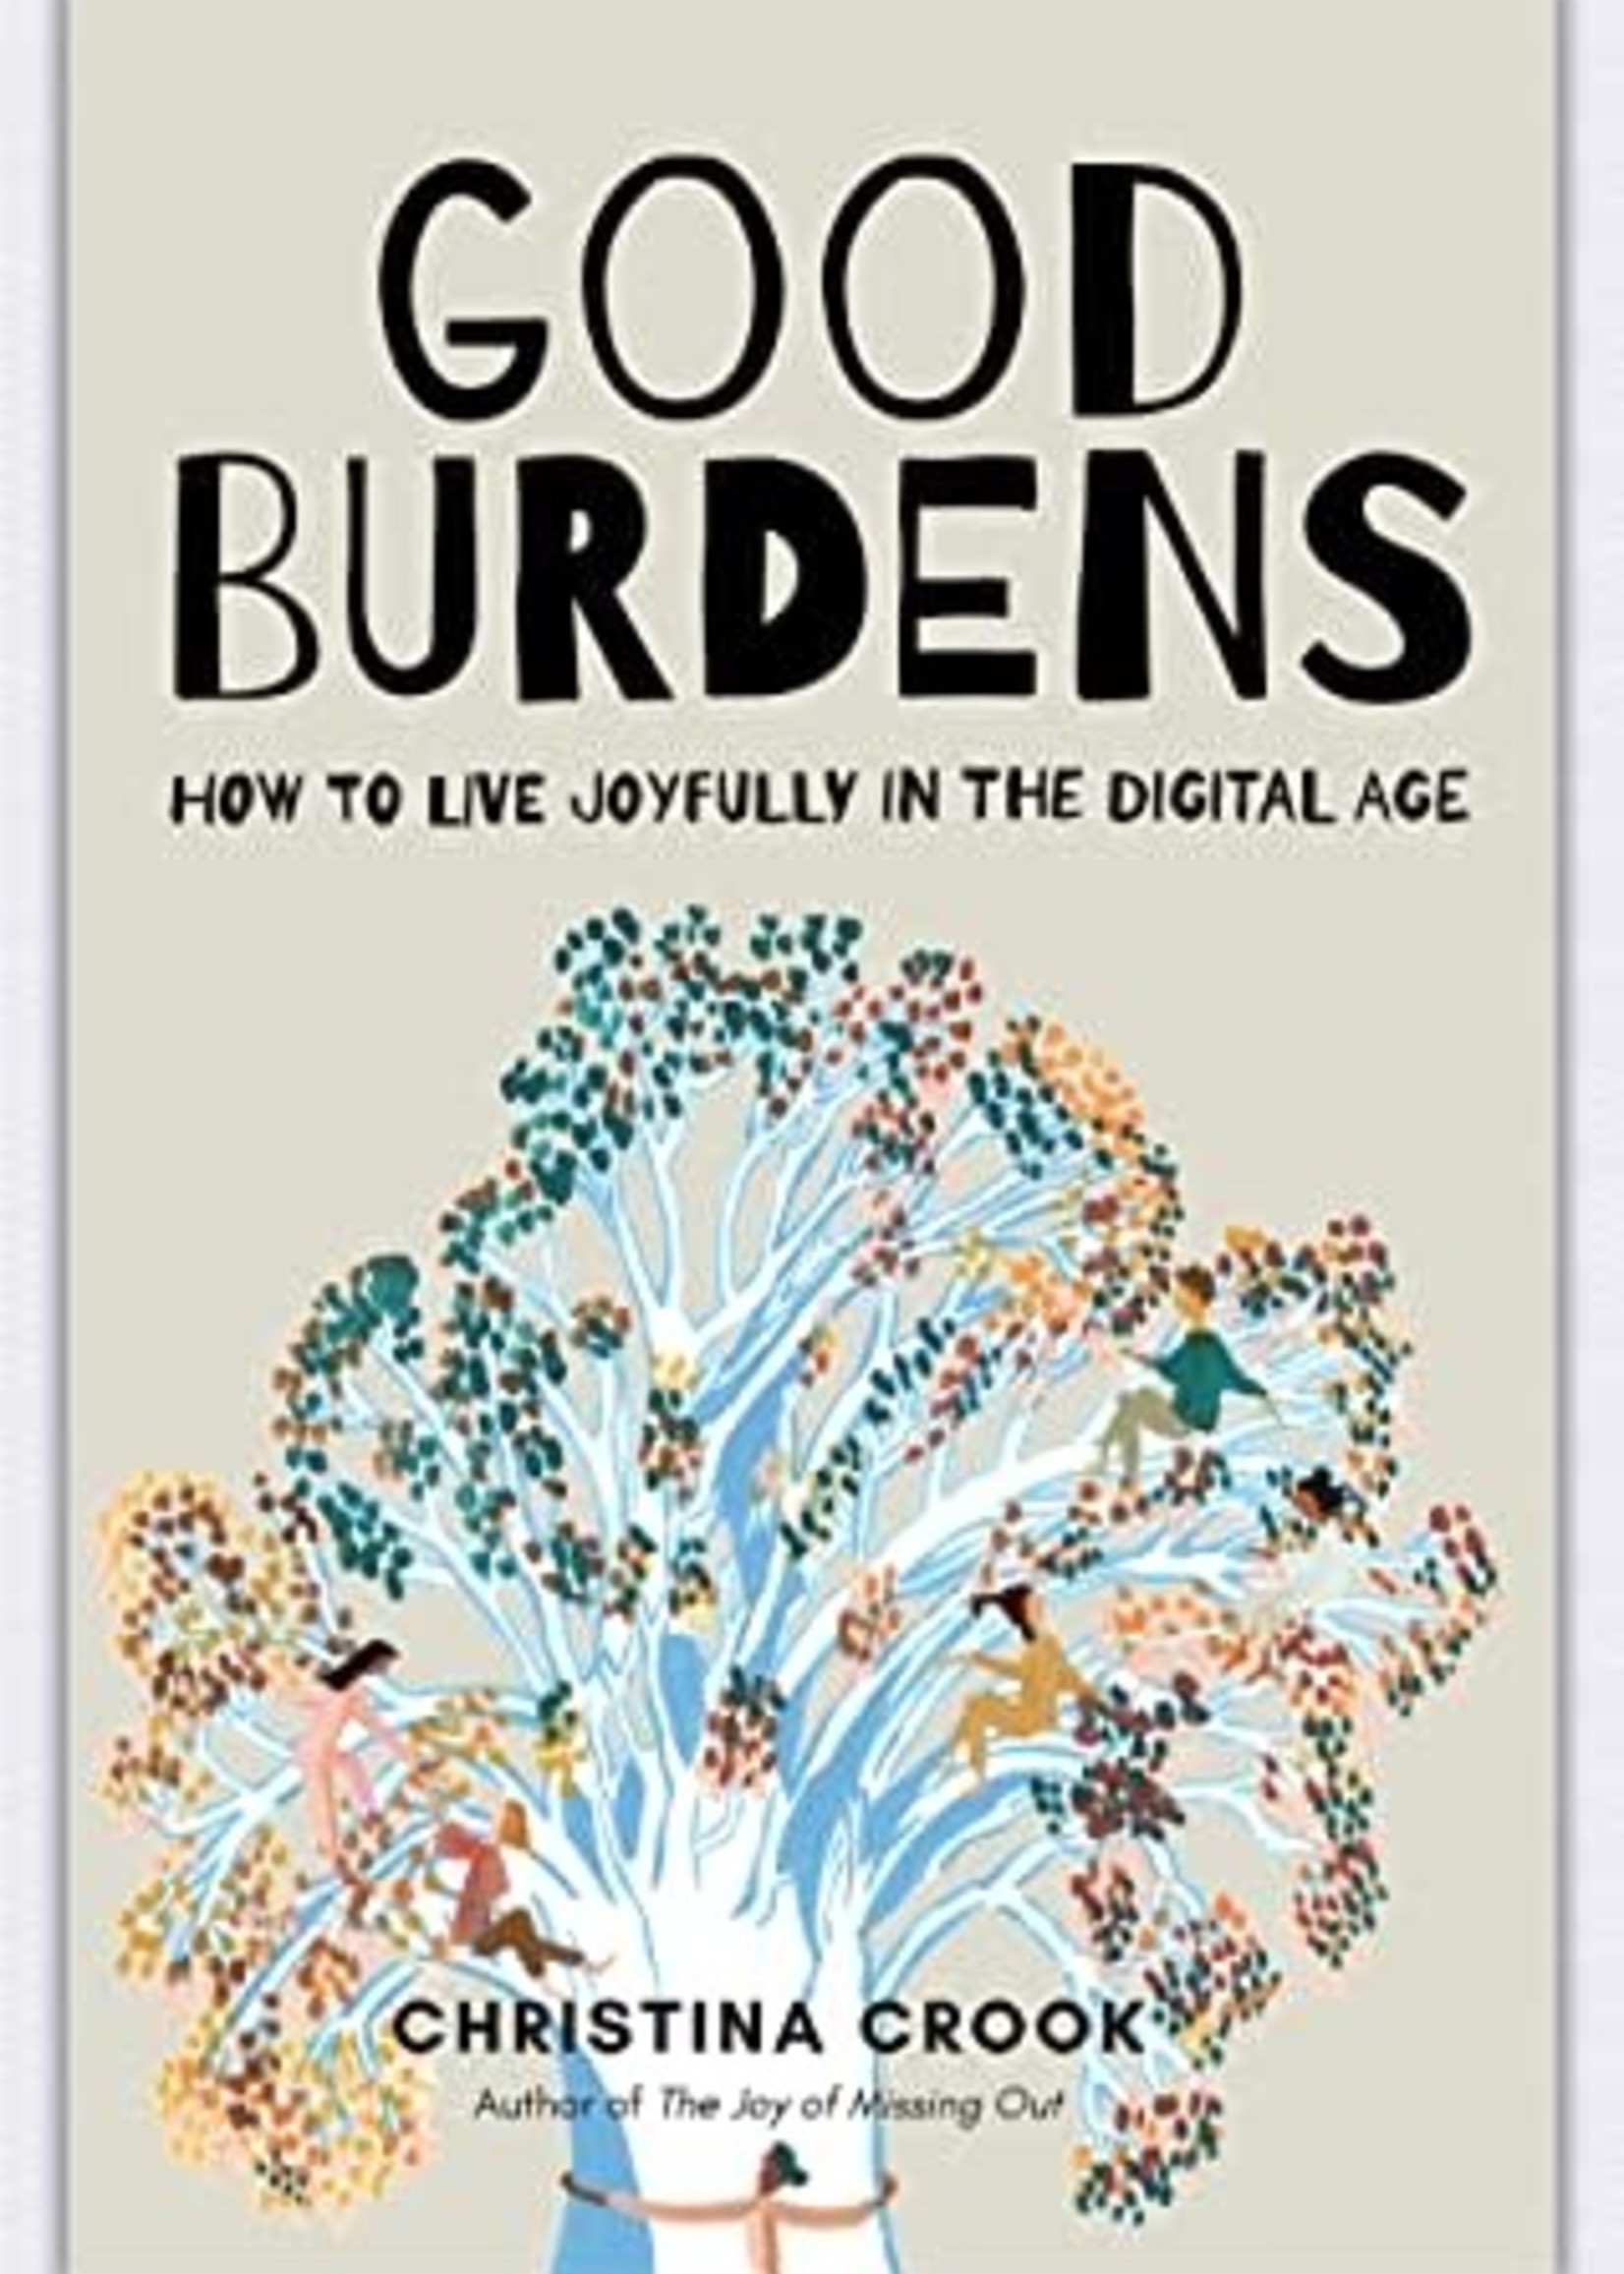 Good Burdens: How to Live Joyfully in the Digital Age by Christina Crook